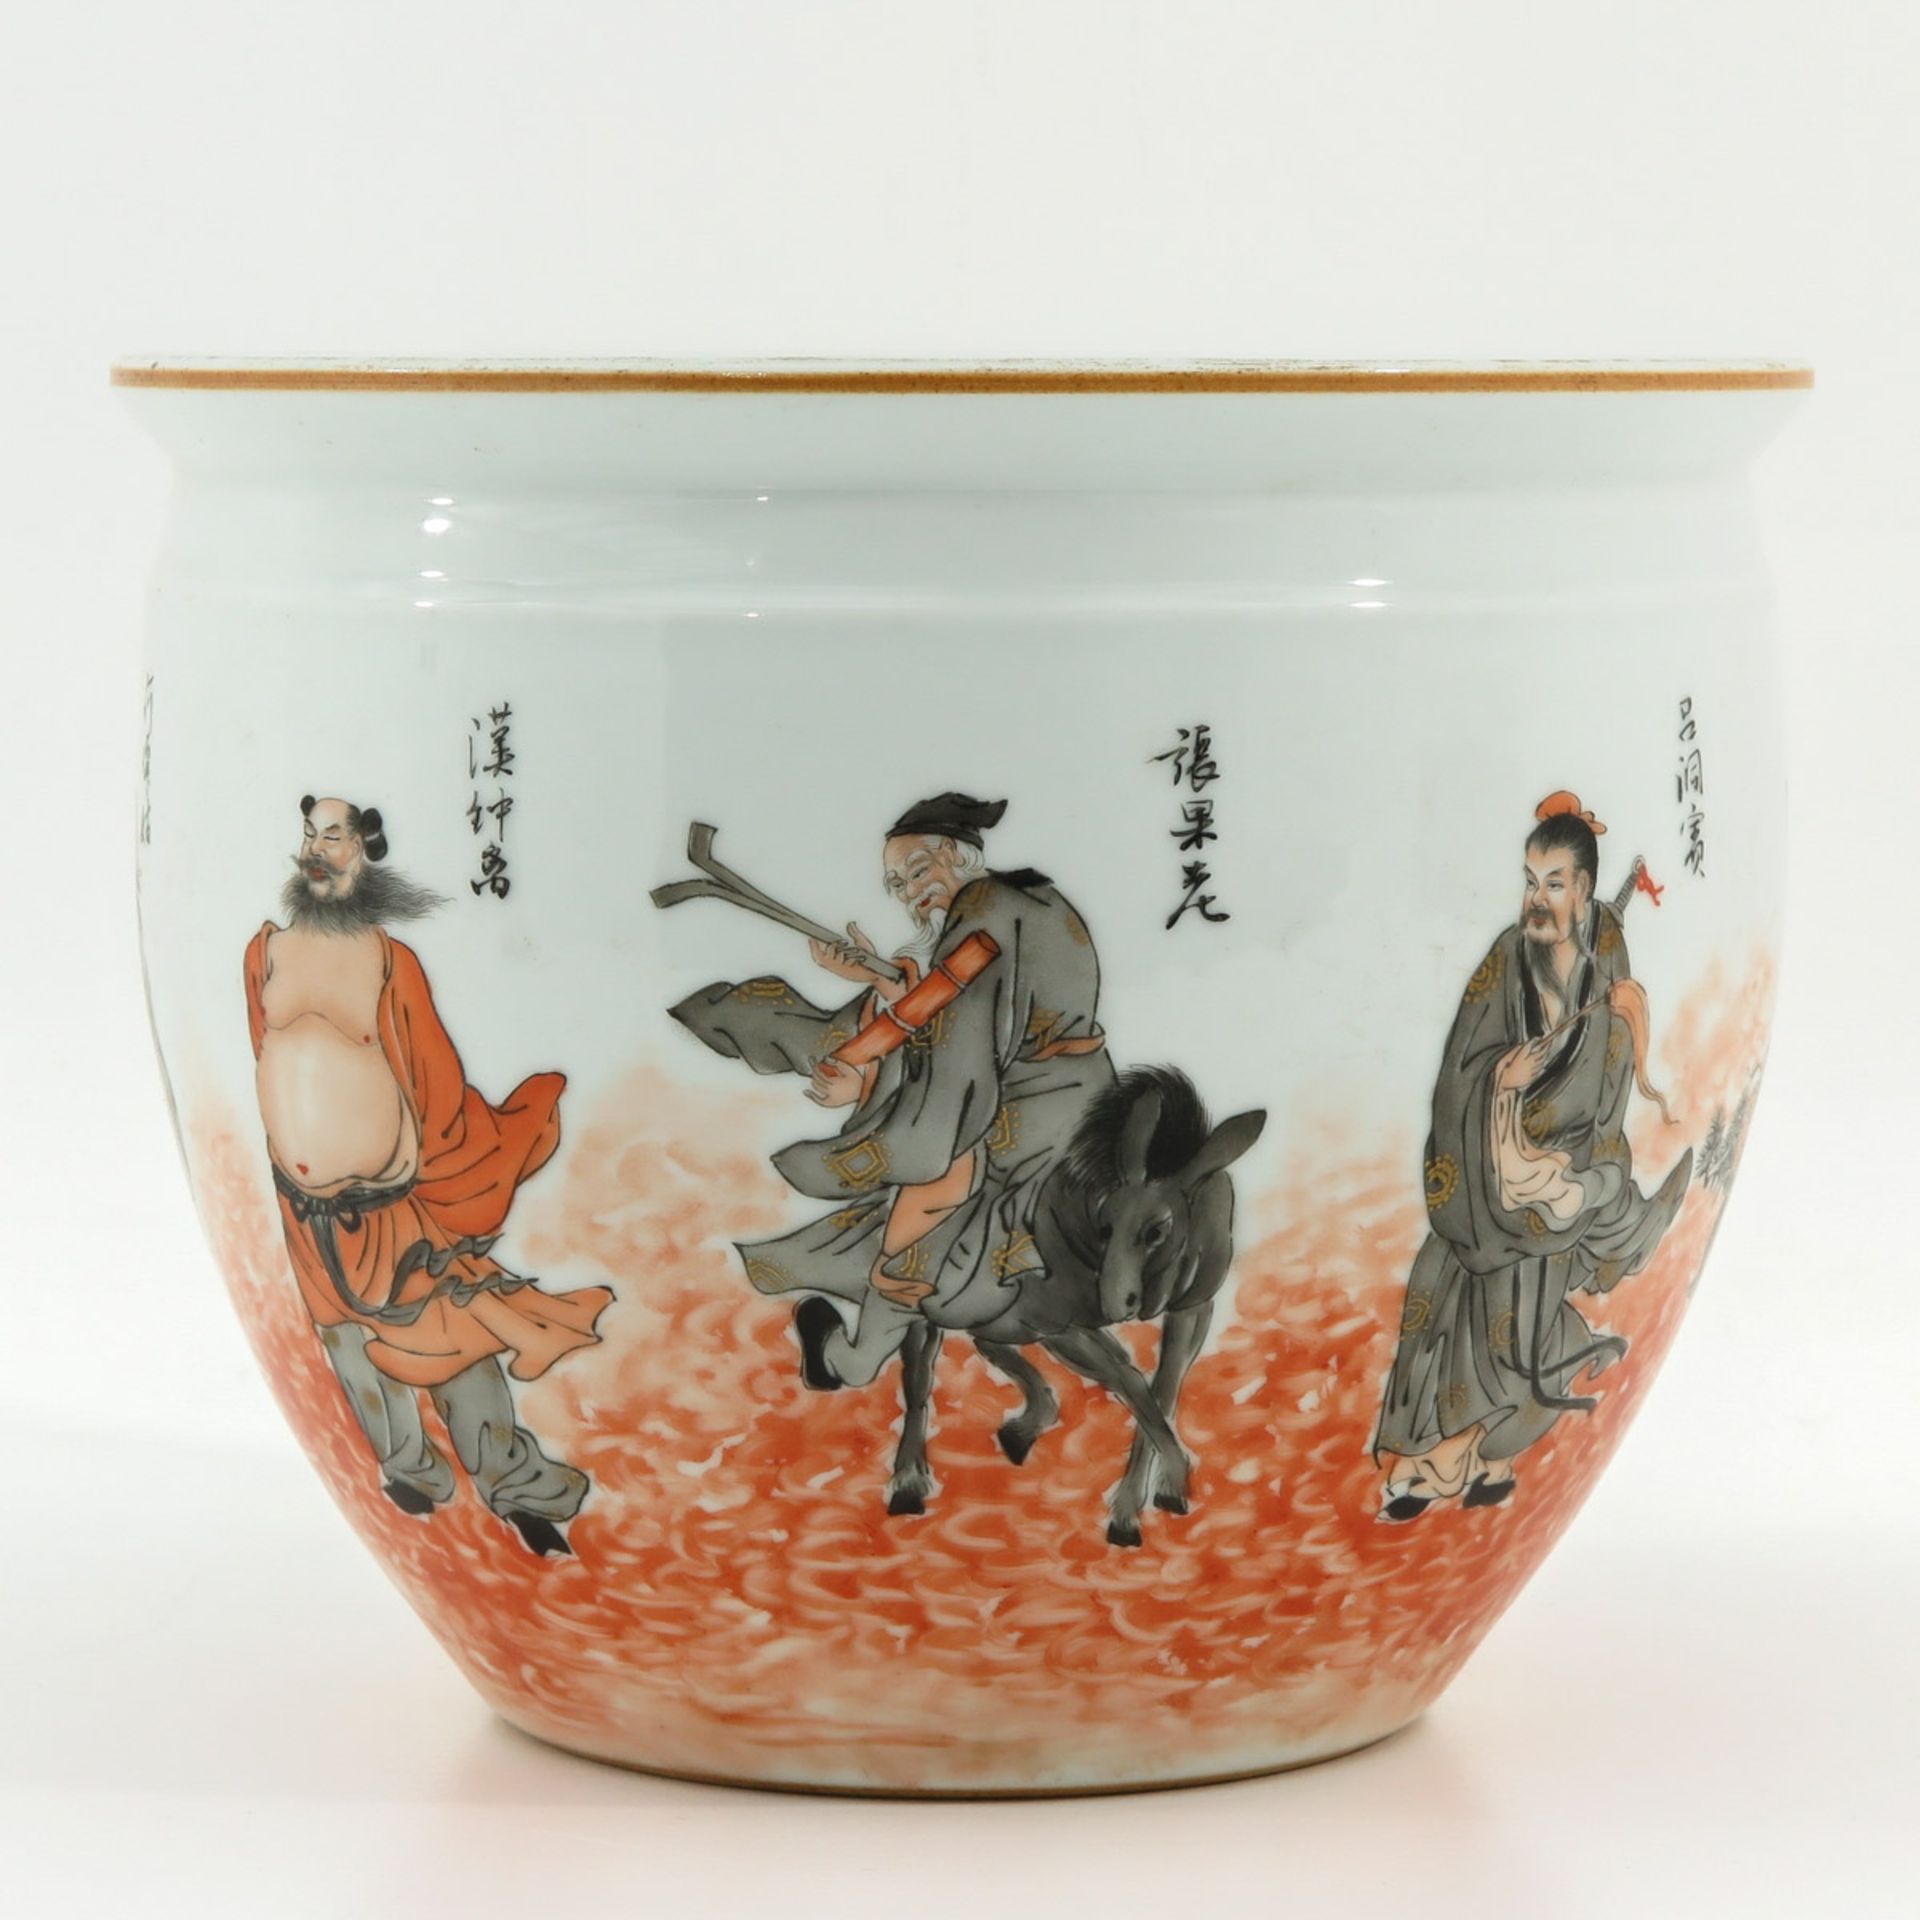 A Polyhchrome Decor Fish Bowl - Image 4 of 10